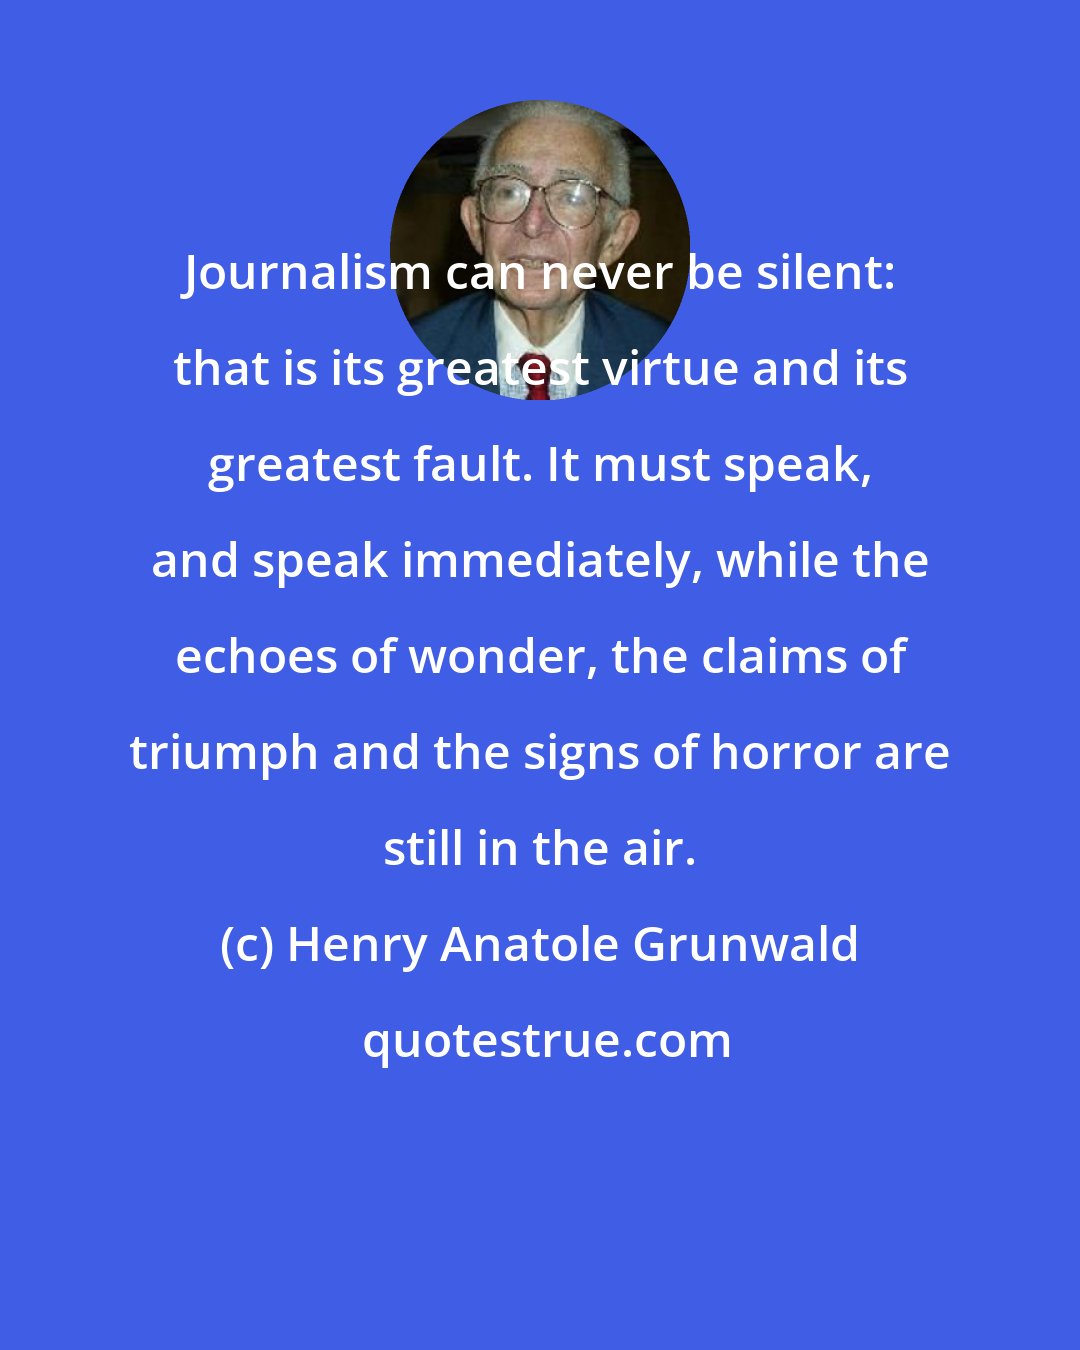 Henry Anatole Grunwald: Journalism can never be silent: that is its greatest virtue and its greatest fault. It must speak, and speak immediately, while the echoes of wonder, the claims of triumph and the signs of horror are still in the air.